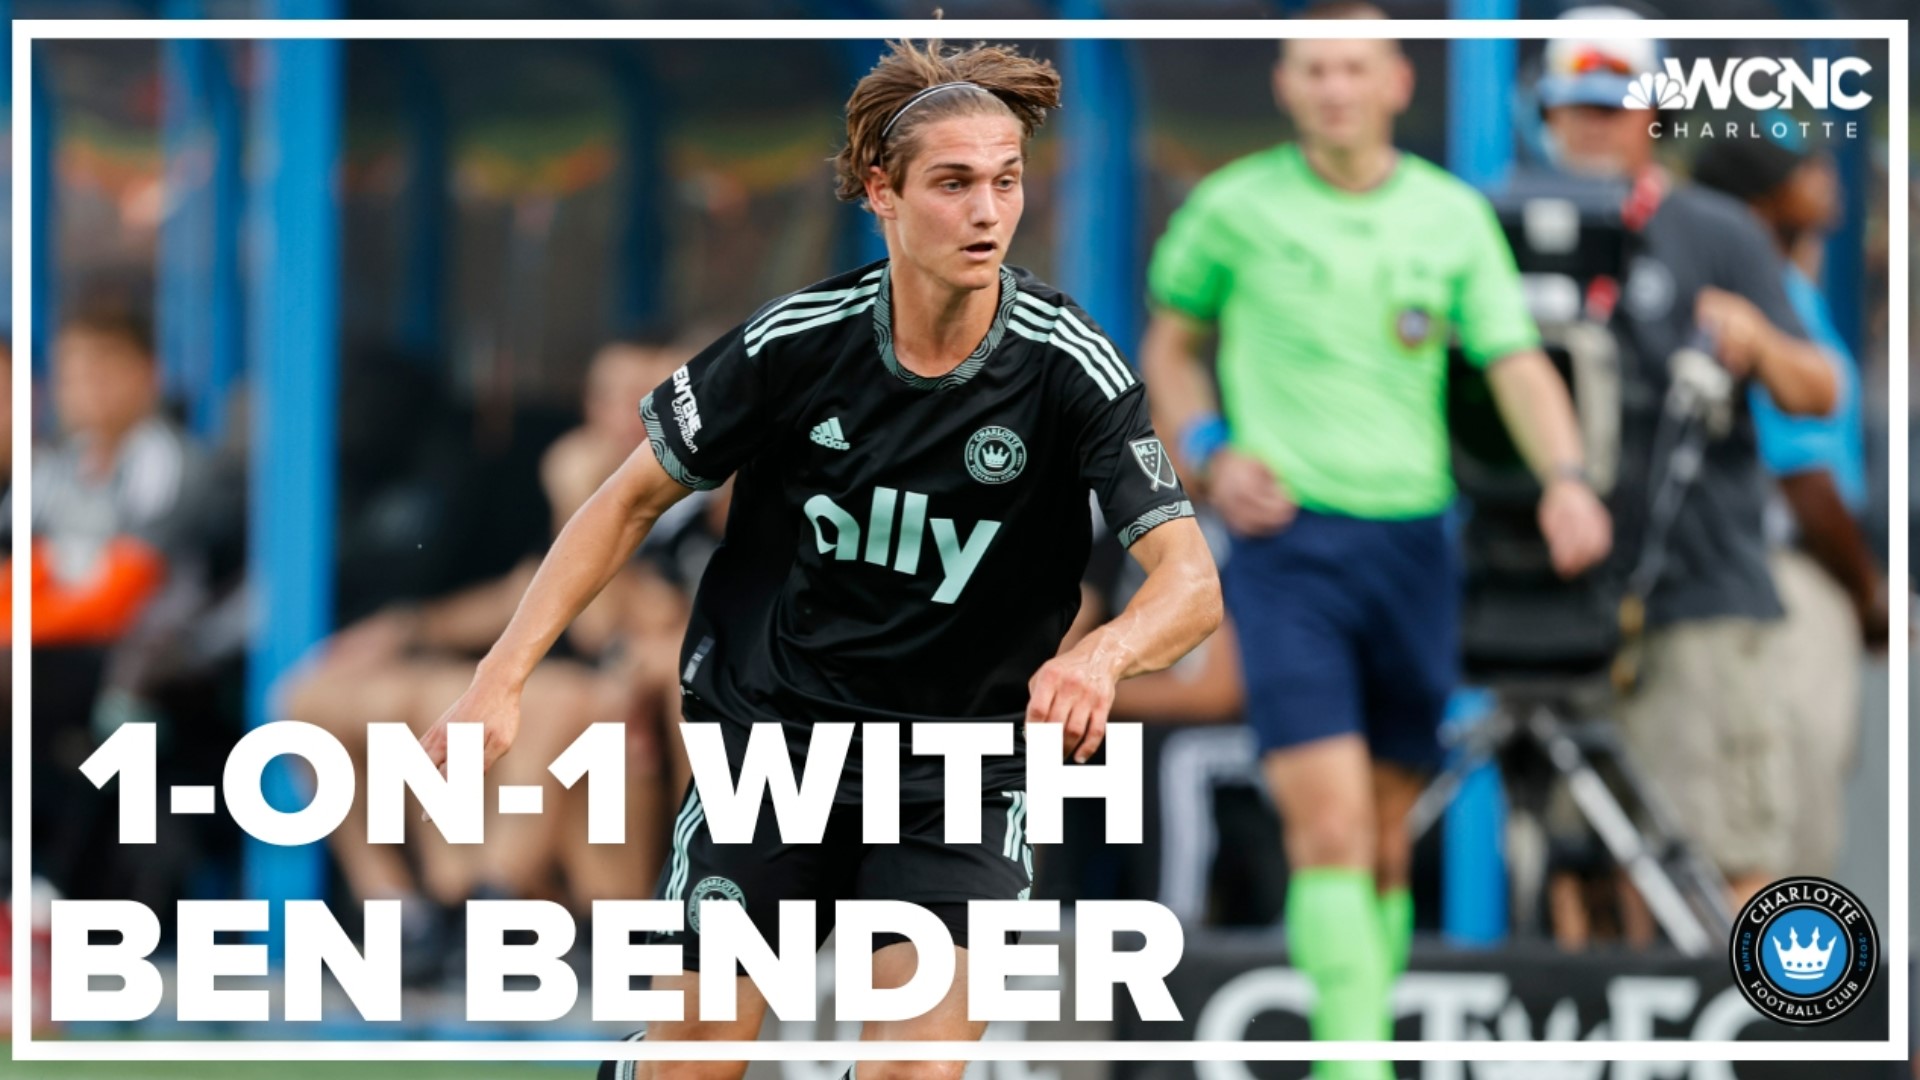 WCNC Charlotte Sports Director Nick Carboni caught up with Charlotte FC star rookie Ben Bender.